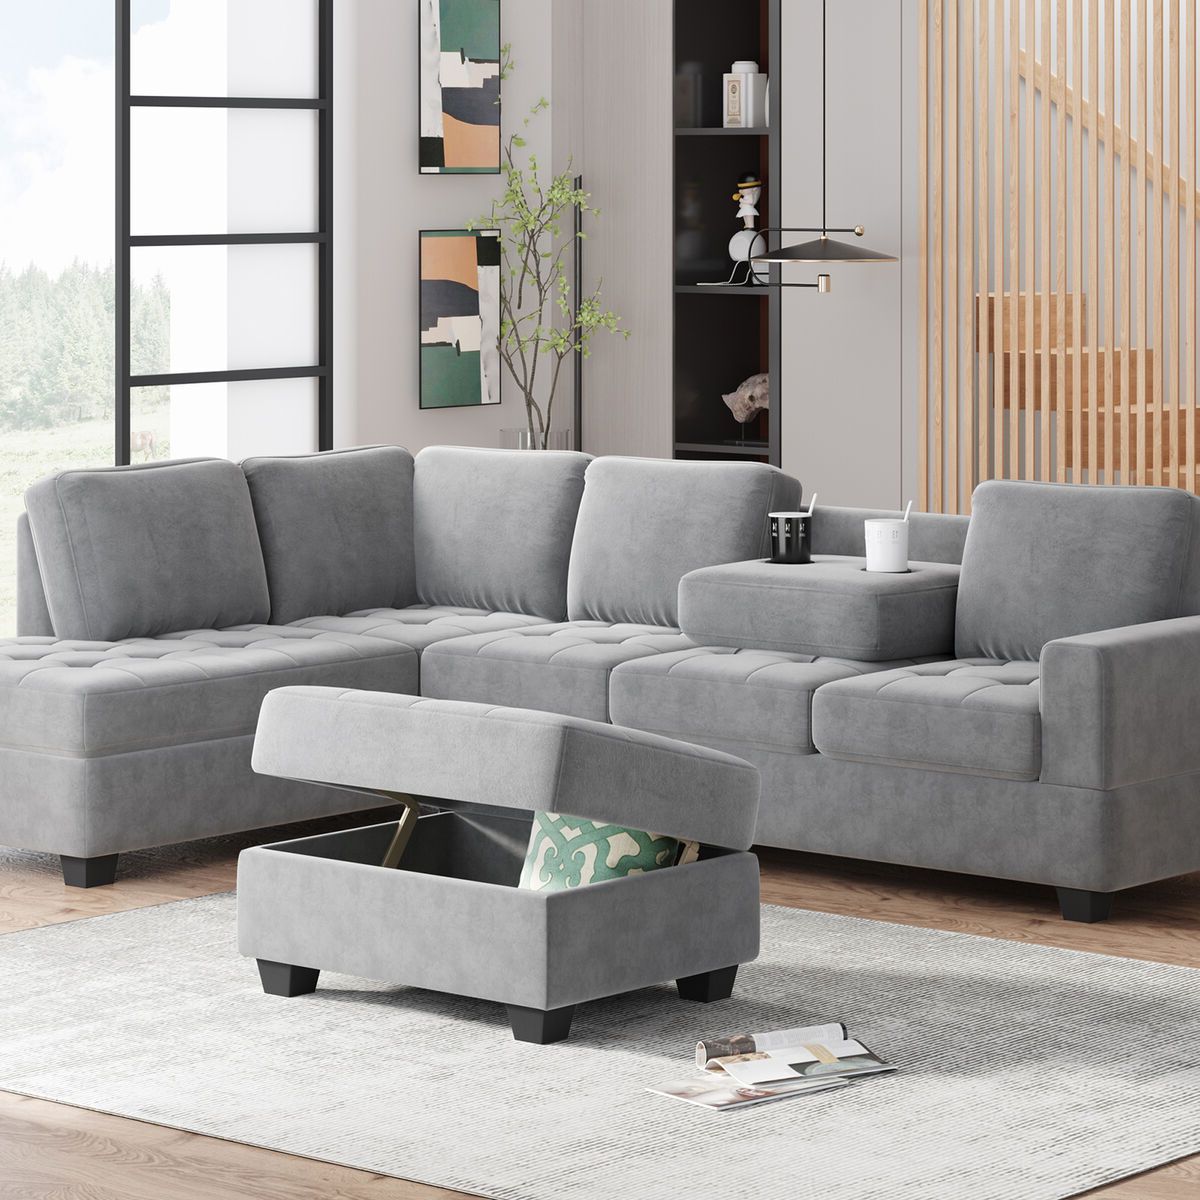 6 Seater L Shaped Sectional Sofa Couch W/ Reversible Chaise Storage  Ottomans Set | Ebay Intended For 6 Seater Sectional Couches (Gallery 4 of 20)